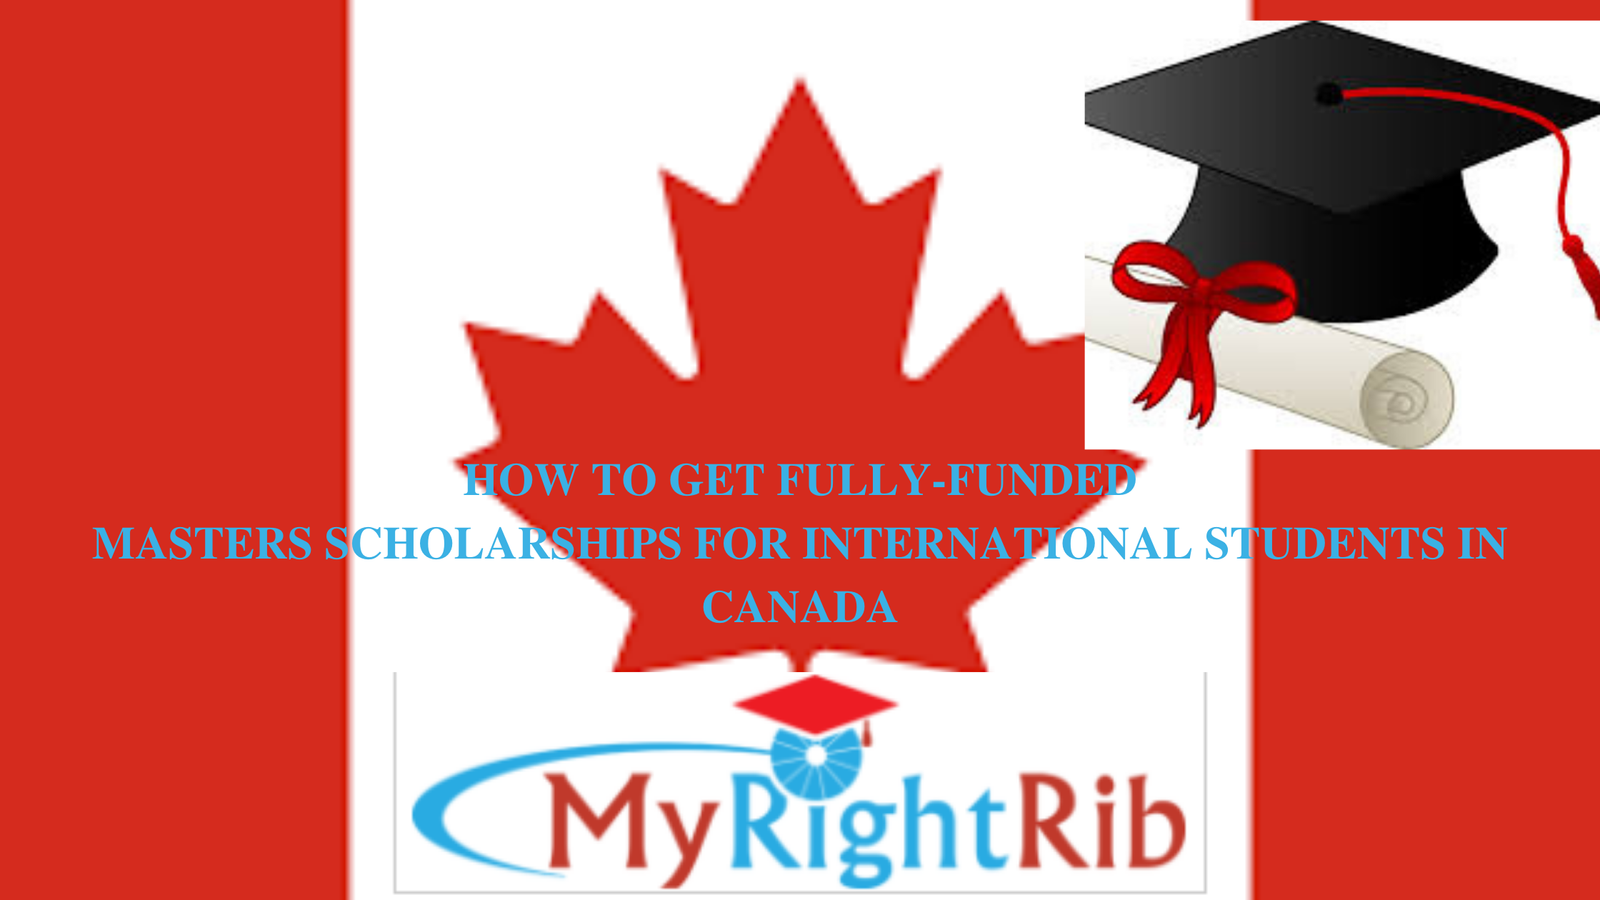 HOW TO GET FULLY-FUNDED MASTERS SCHOLARSHIPS FOR INTERNATIONAL STUDENTS IN CANADA